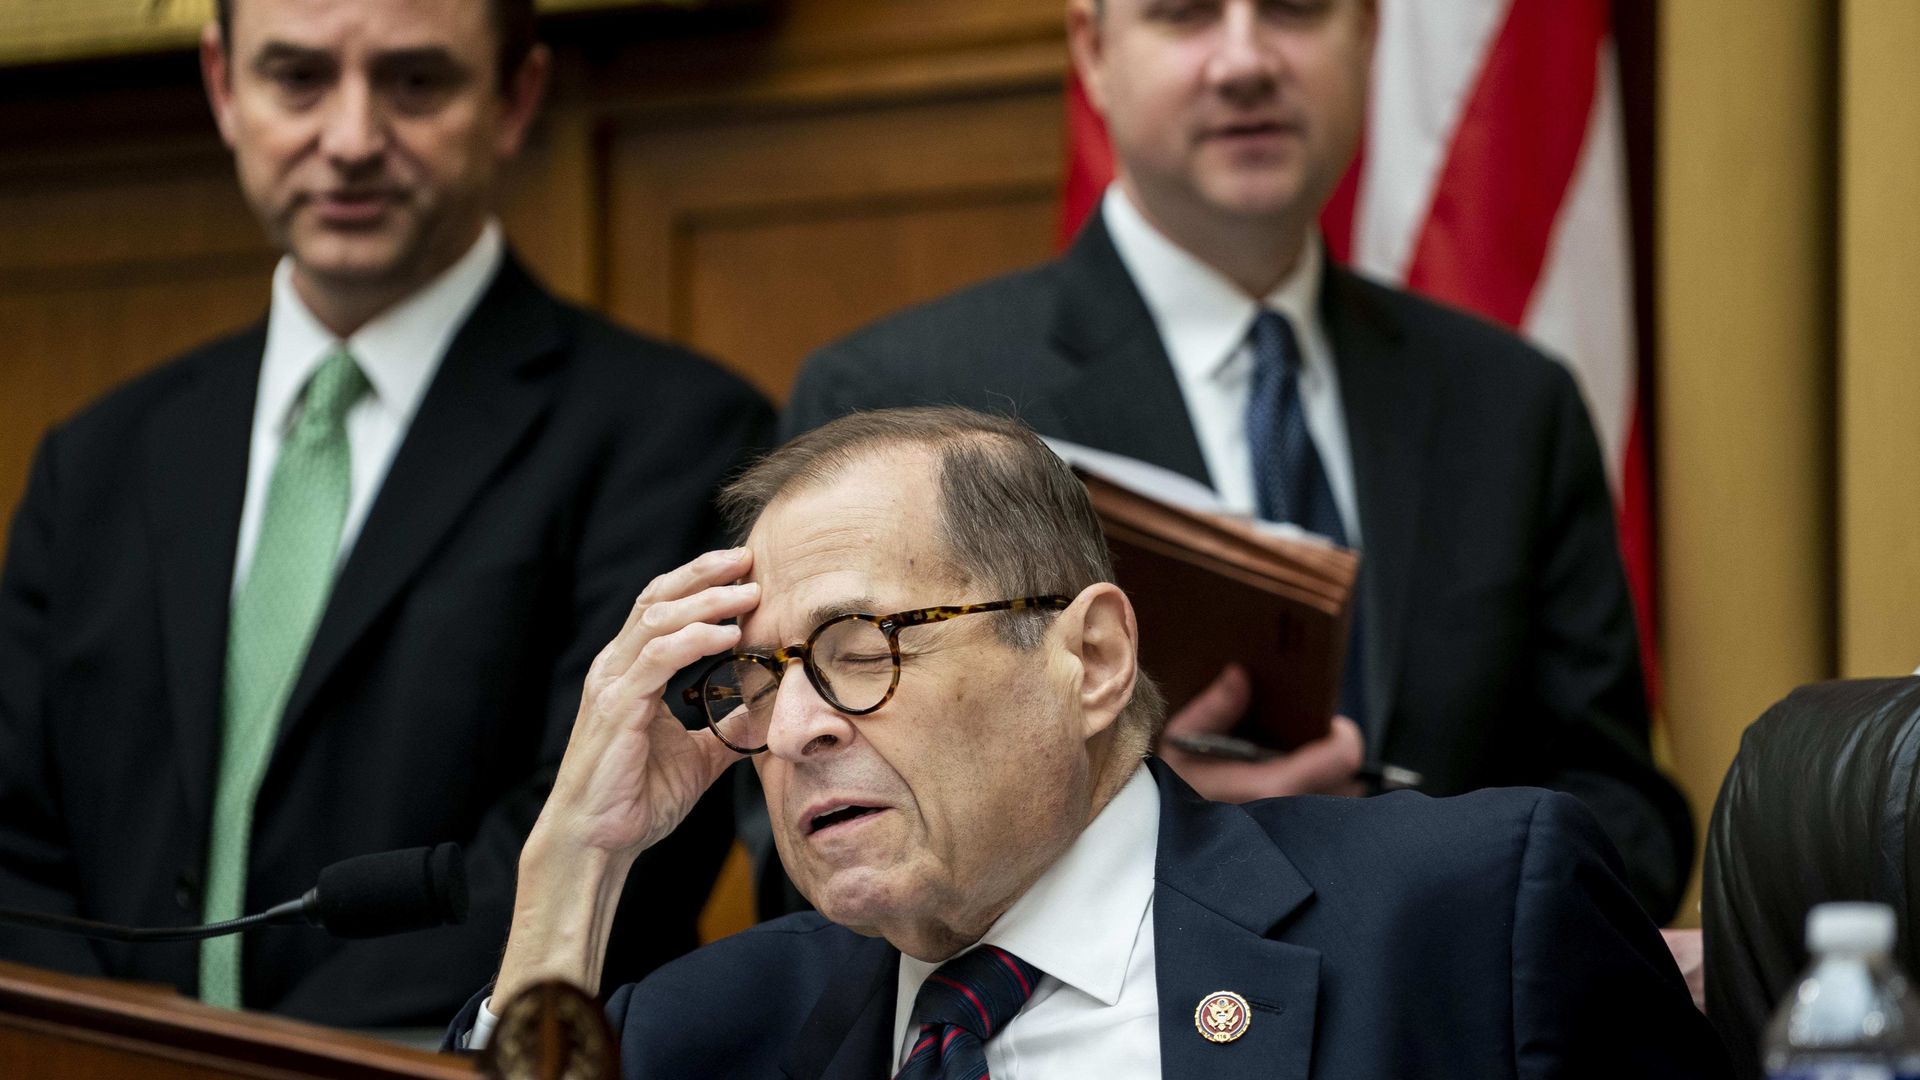 In this image, Nadler shuts his eyes and holds his head while sitting down. Two men stand behind him, on either side of him.